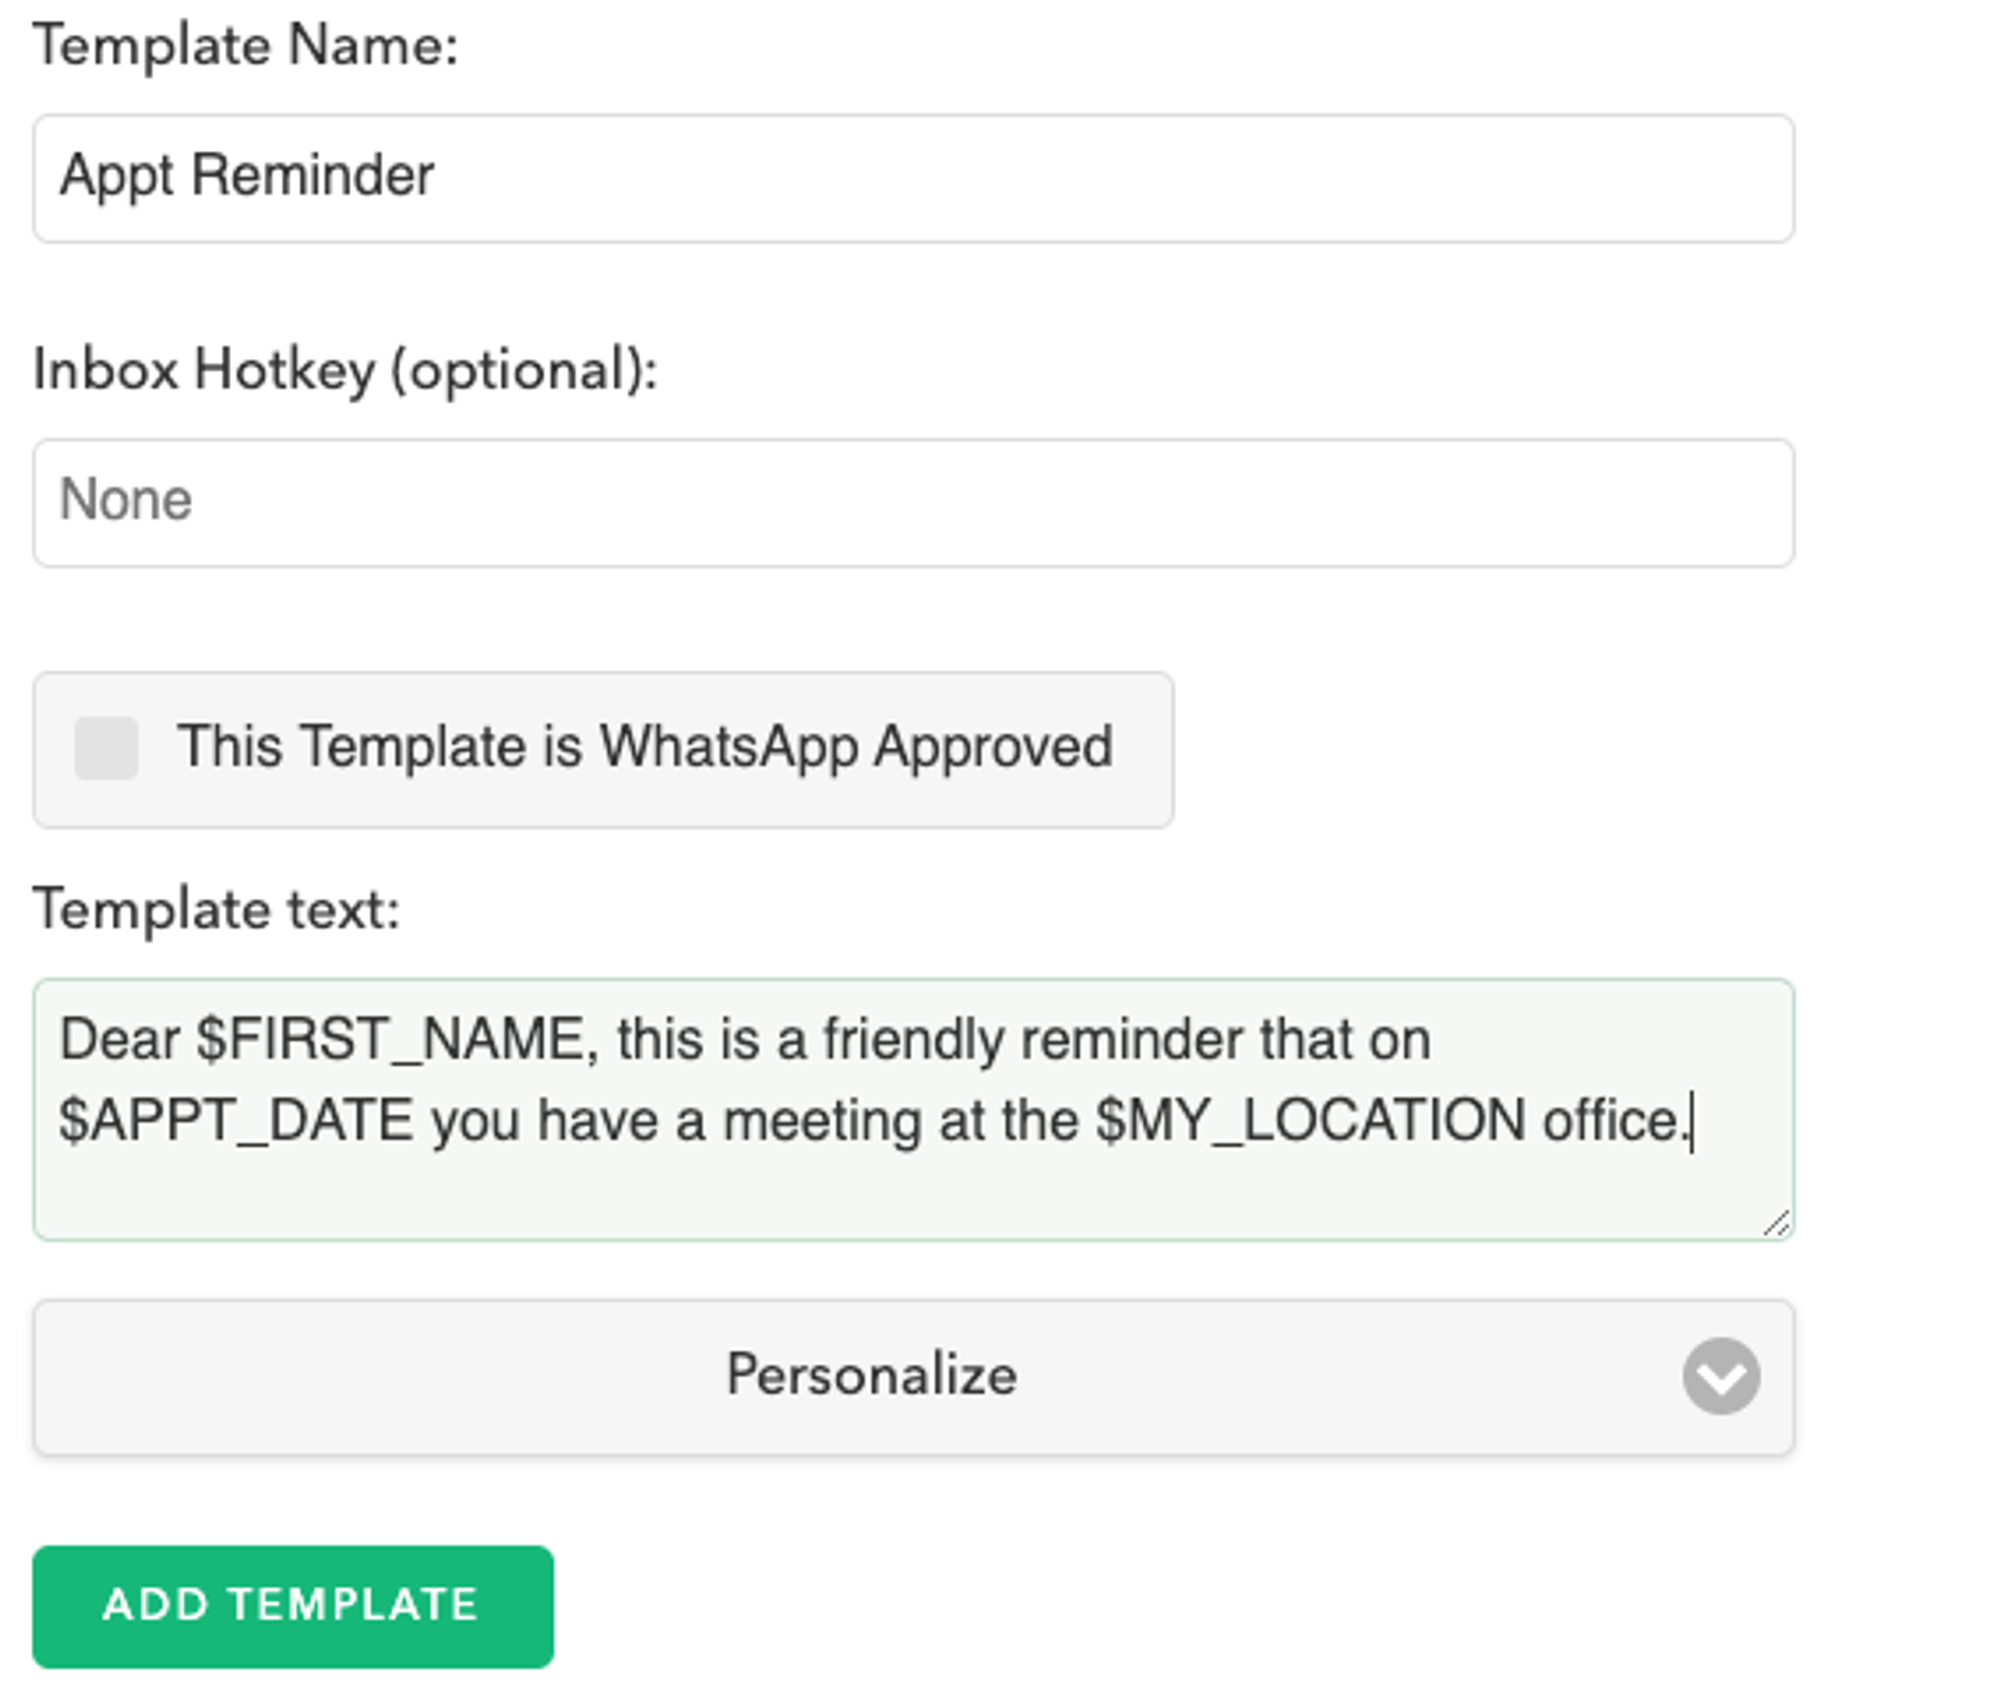 Creating a Template in Avochato under “Settings > Templates”. Templates can be used anywhere including when sending messages from Salesforce Flow Builder, Campaigns, or directly in the chat box.